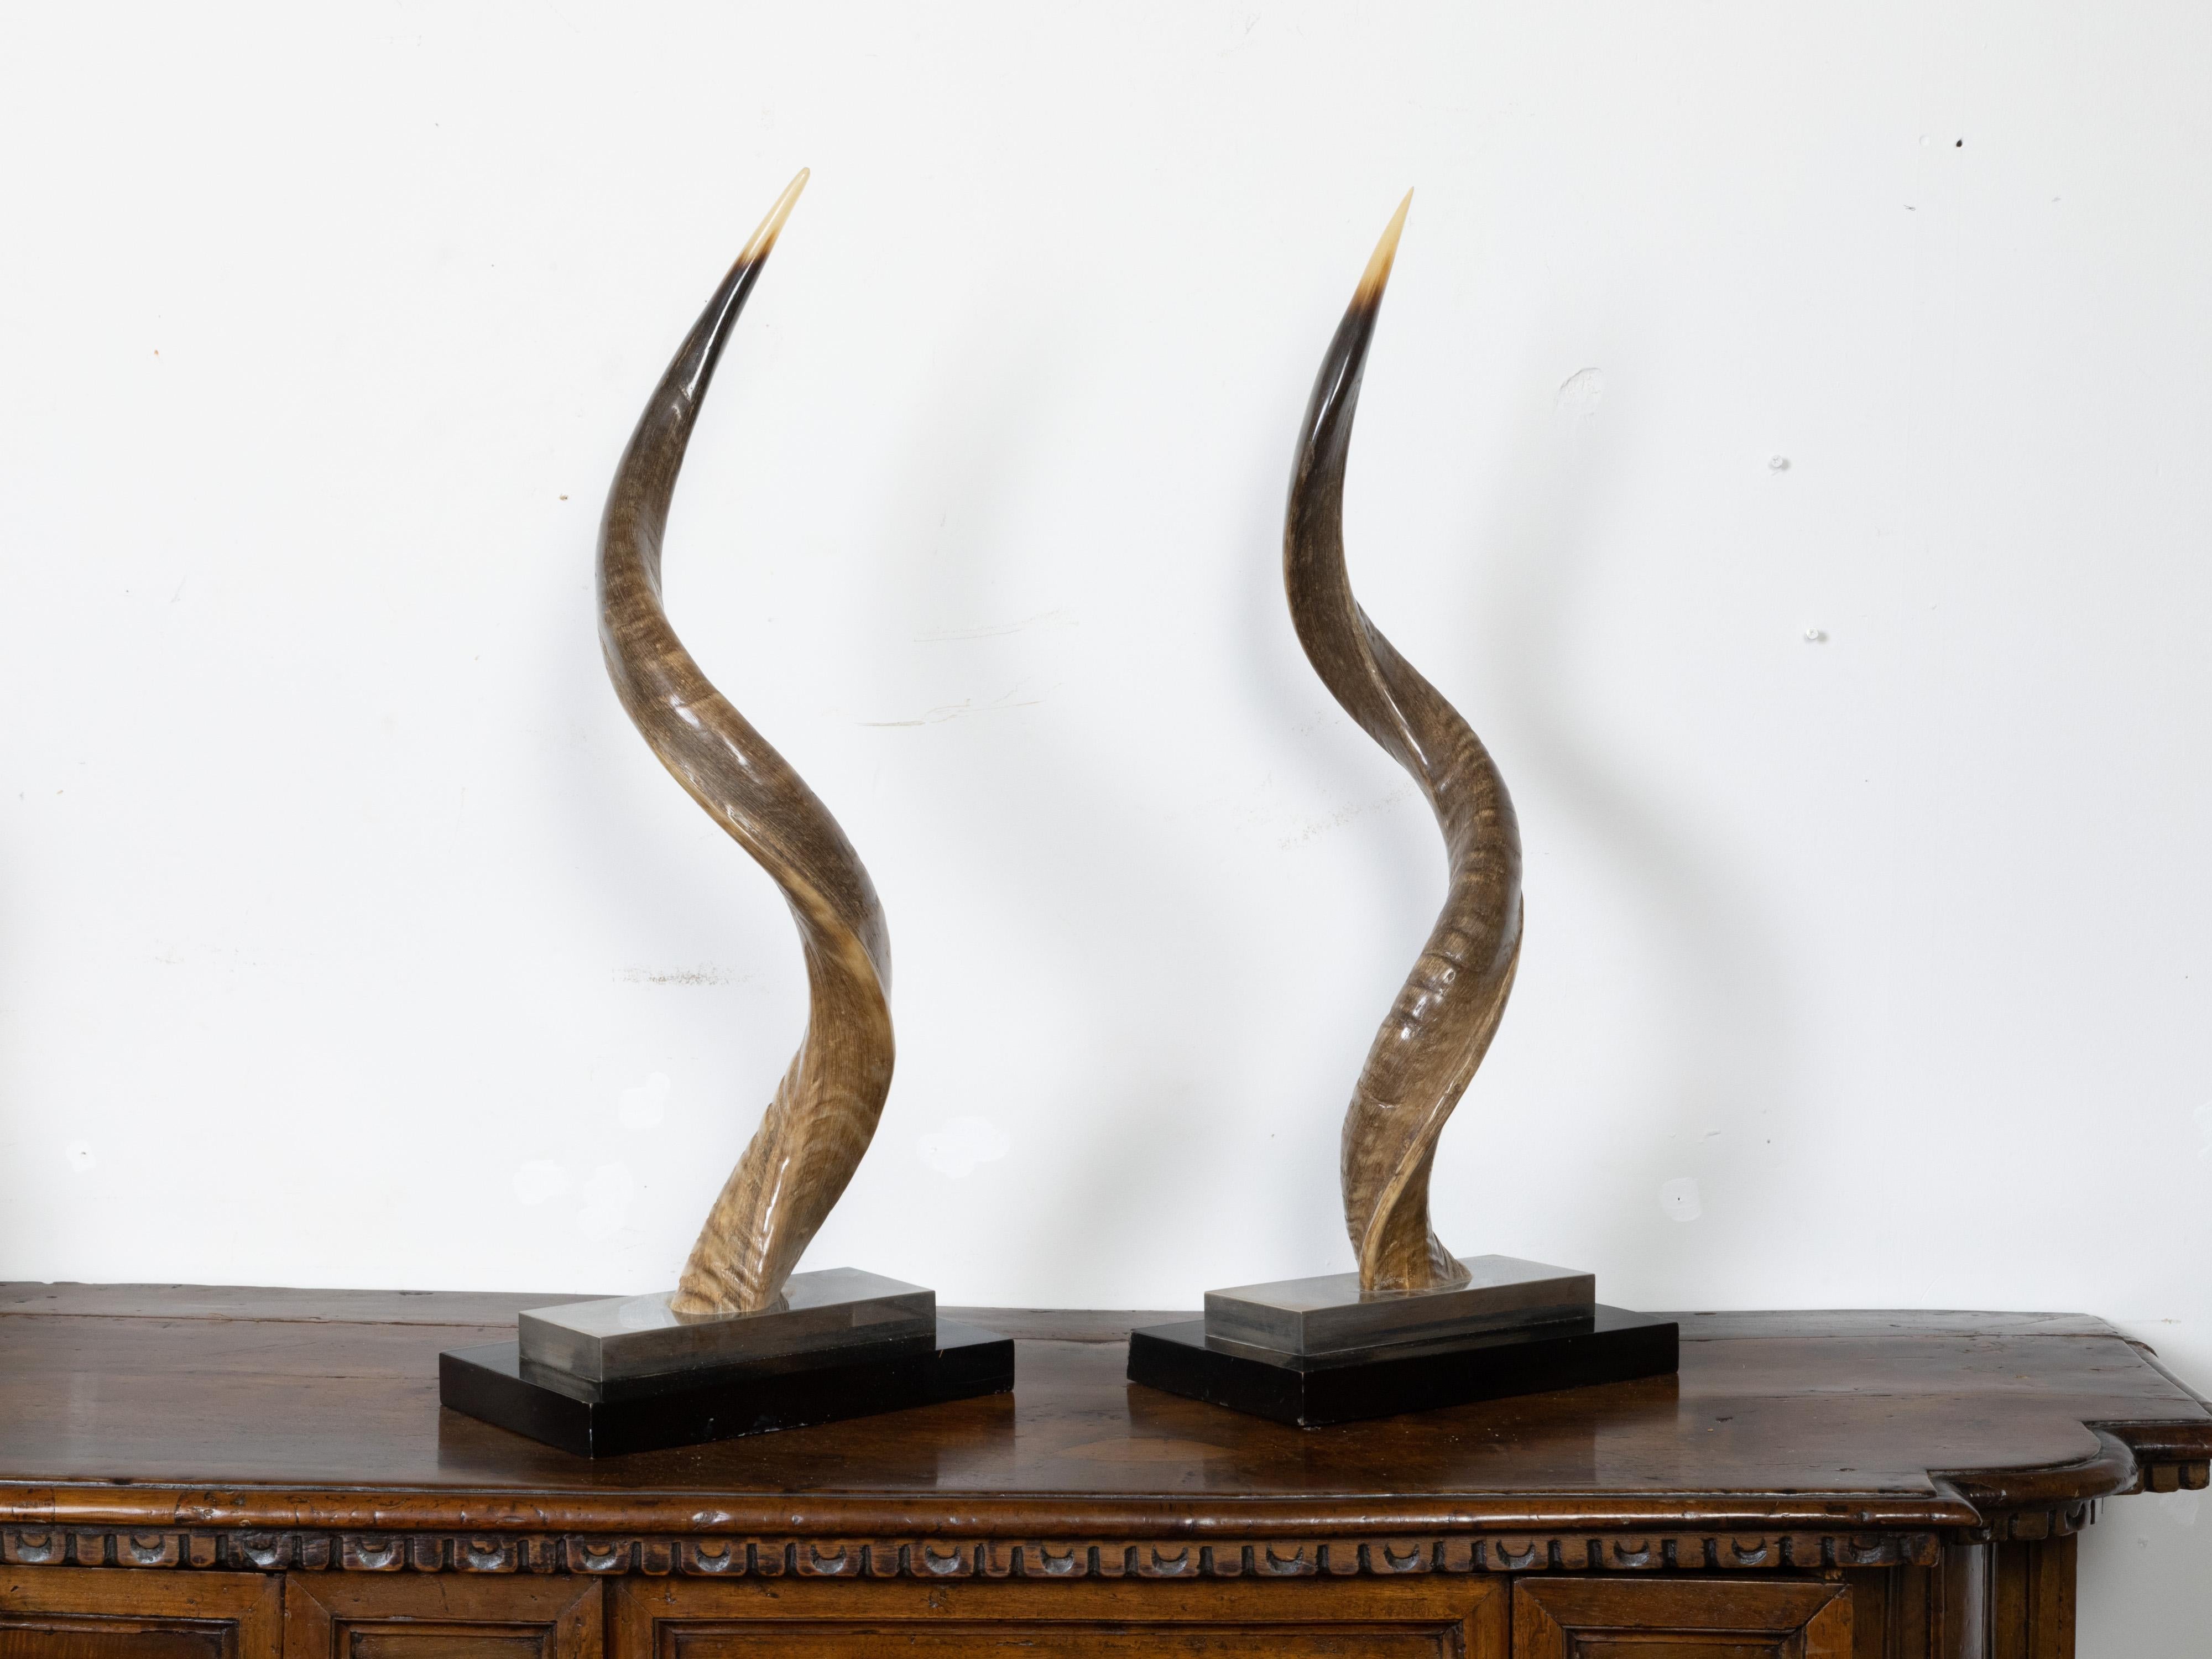 A pair of European midcentury horns mounted on stepped bases. Capturing our attention with their great presence, each of this pair of horns is mounted on a stepped base showcasing silver and black tones. With their sinuous lines and contrasting